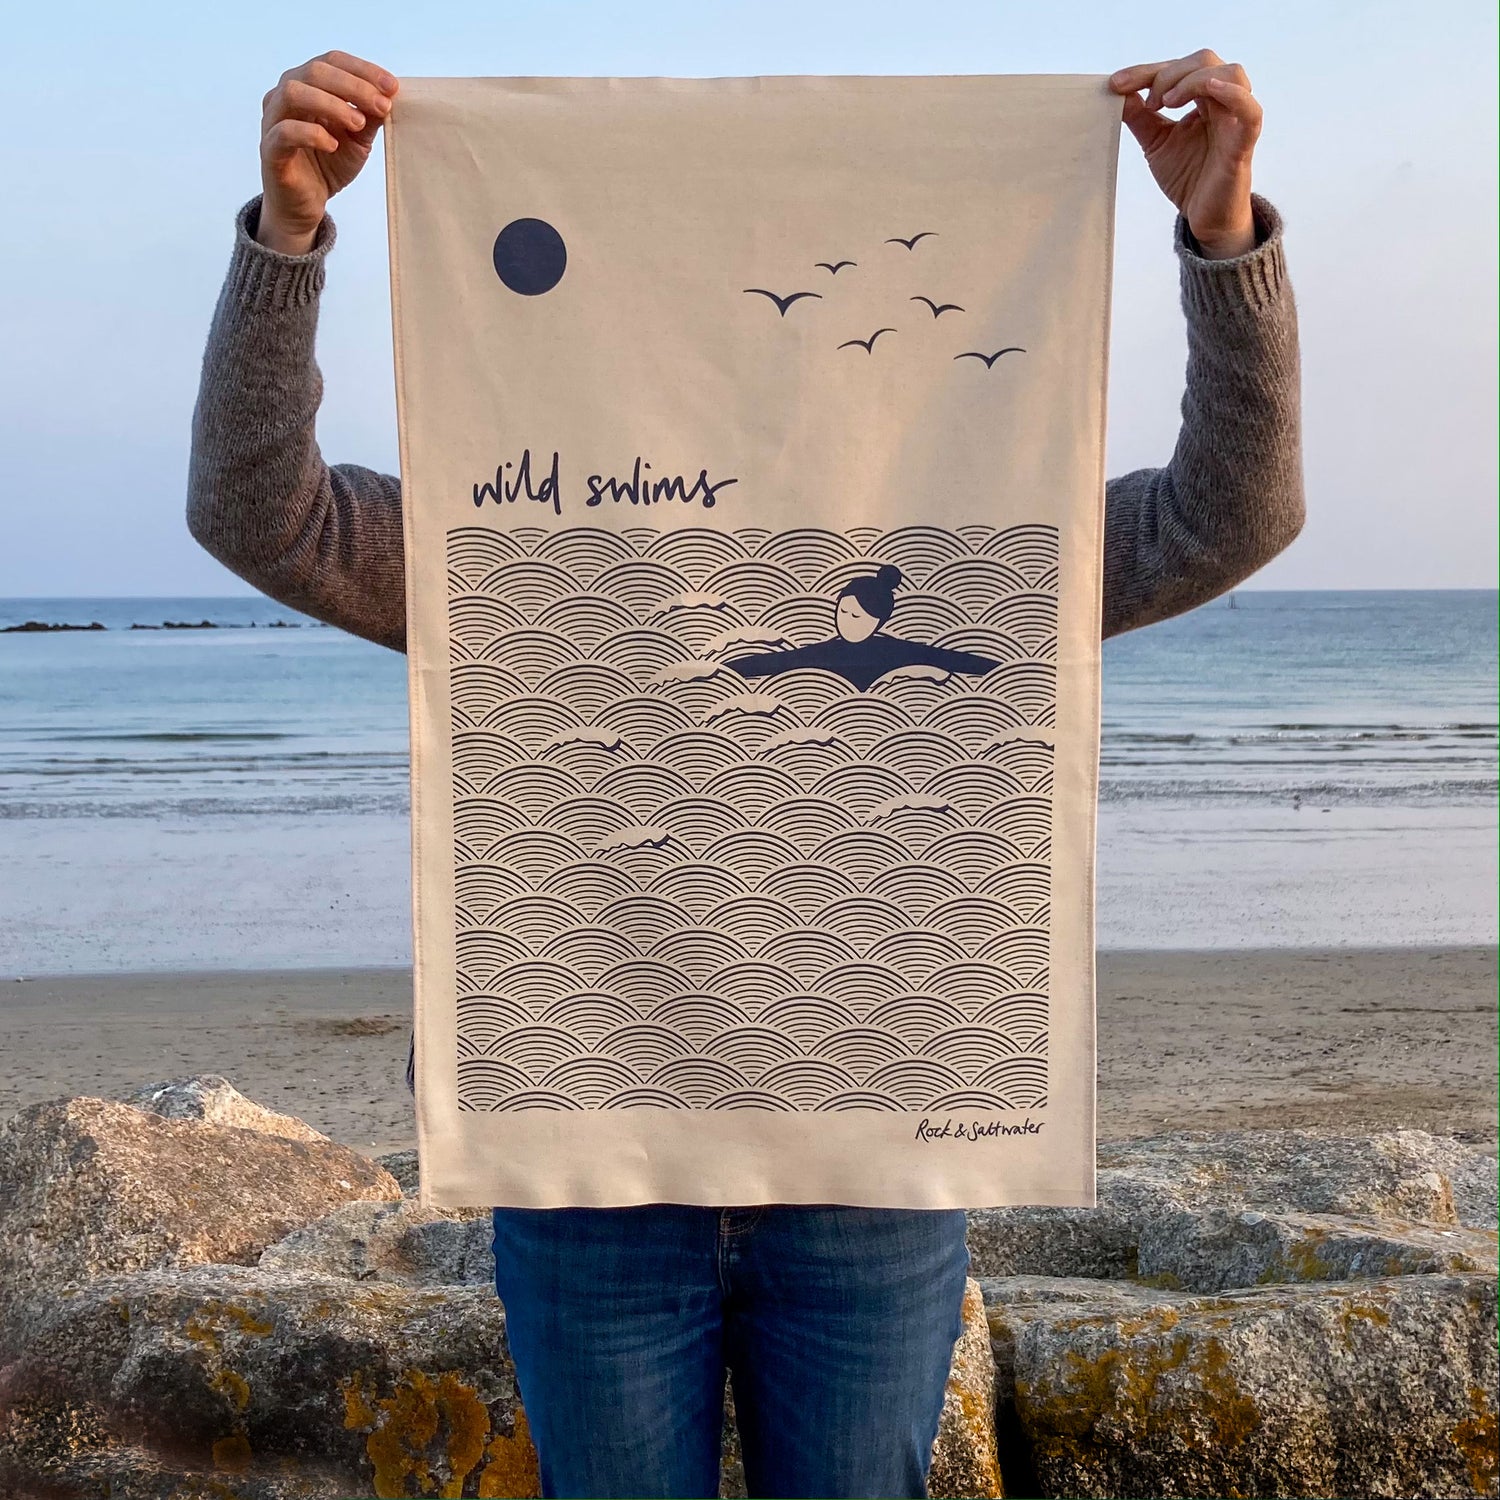 Women holding a 'wild swims' organic cotton tea towel, stood in front of the beach.